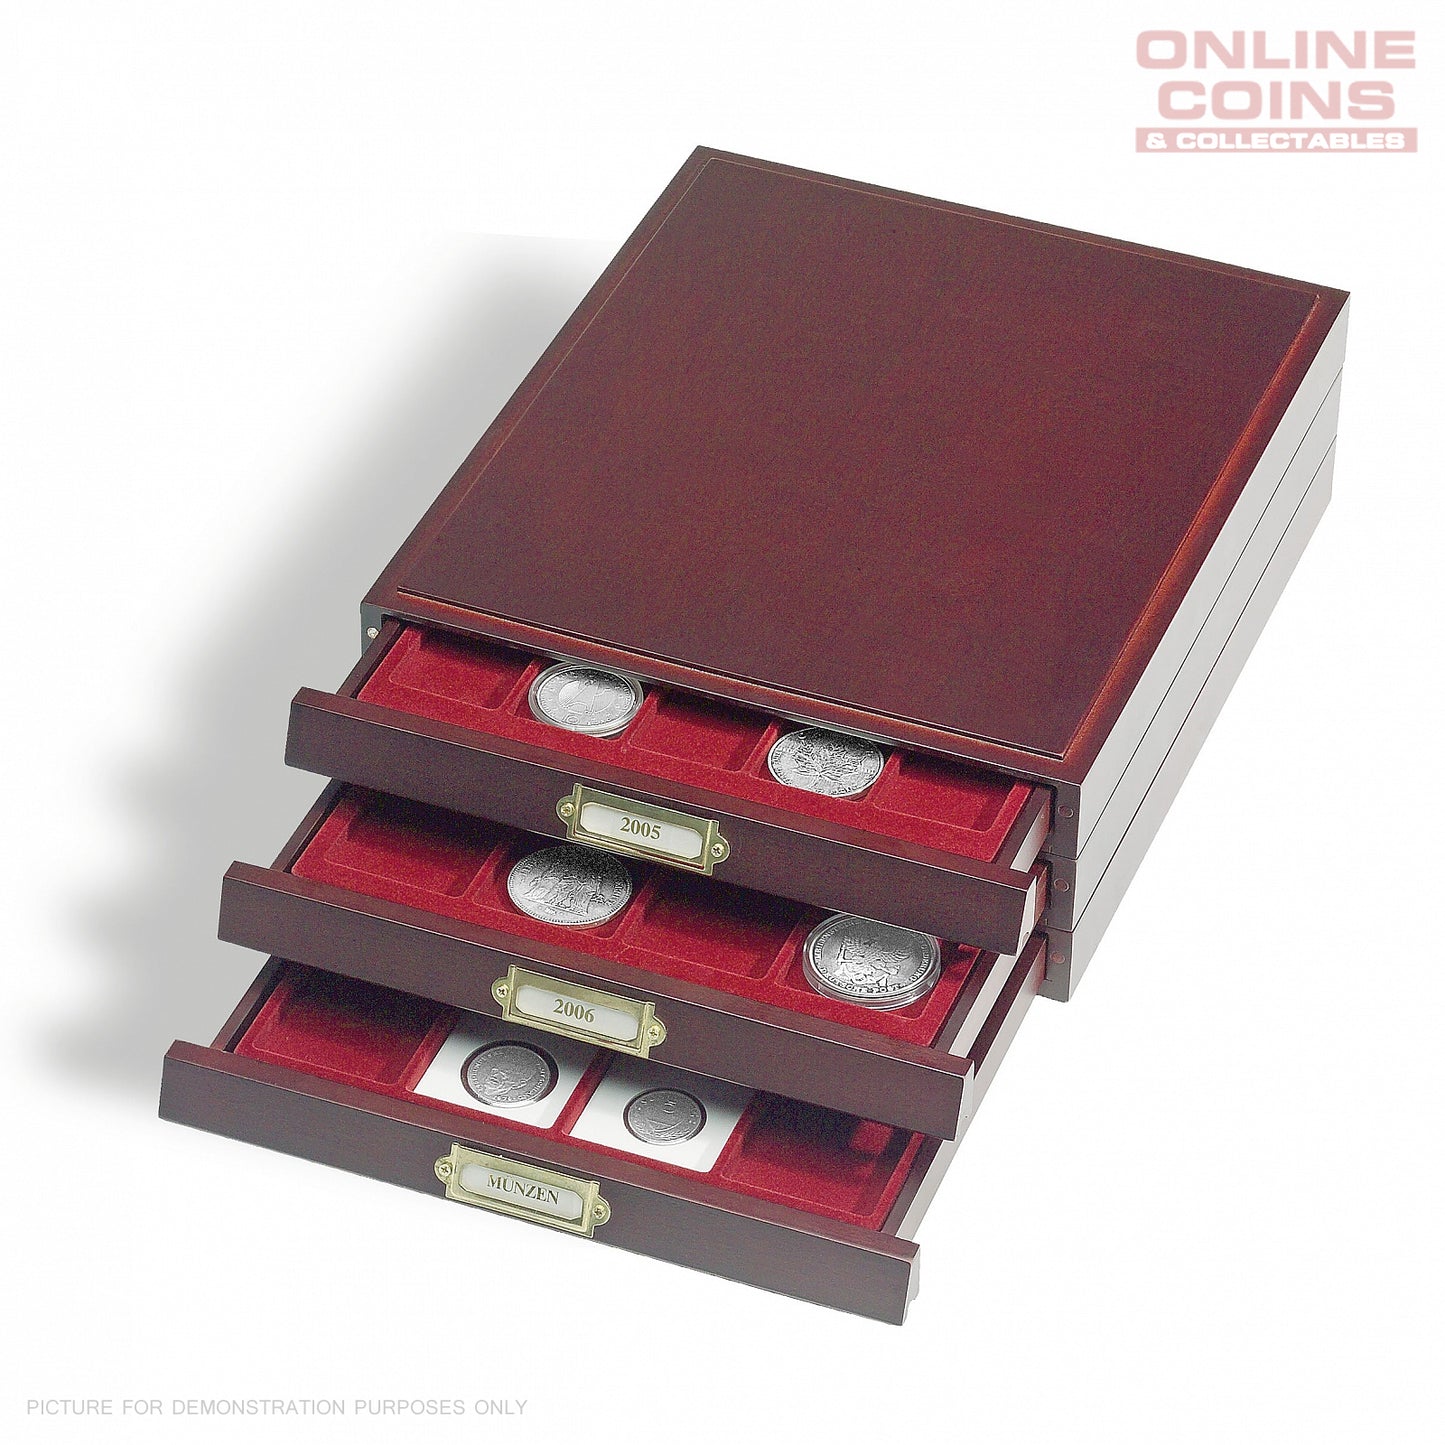 LIGNUM Coin drawer - 20 Square Compartments For Quadrums and Coin Holders